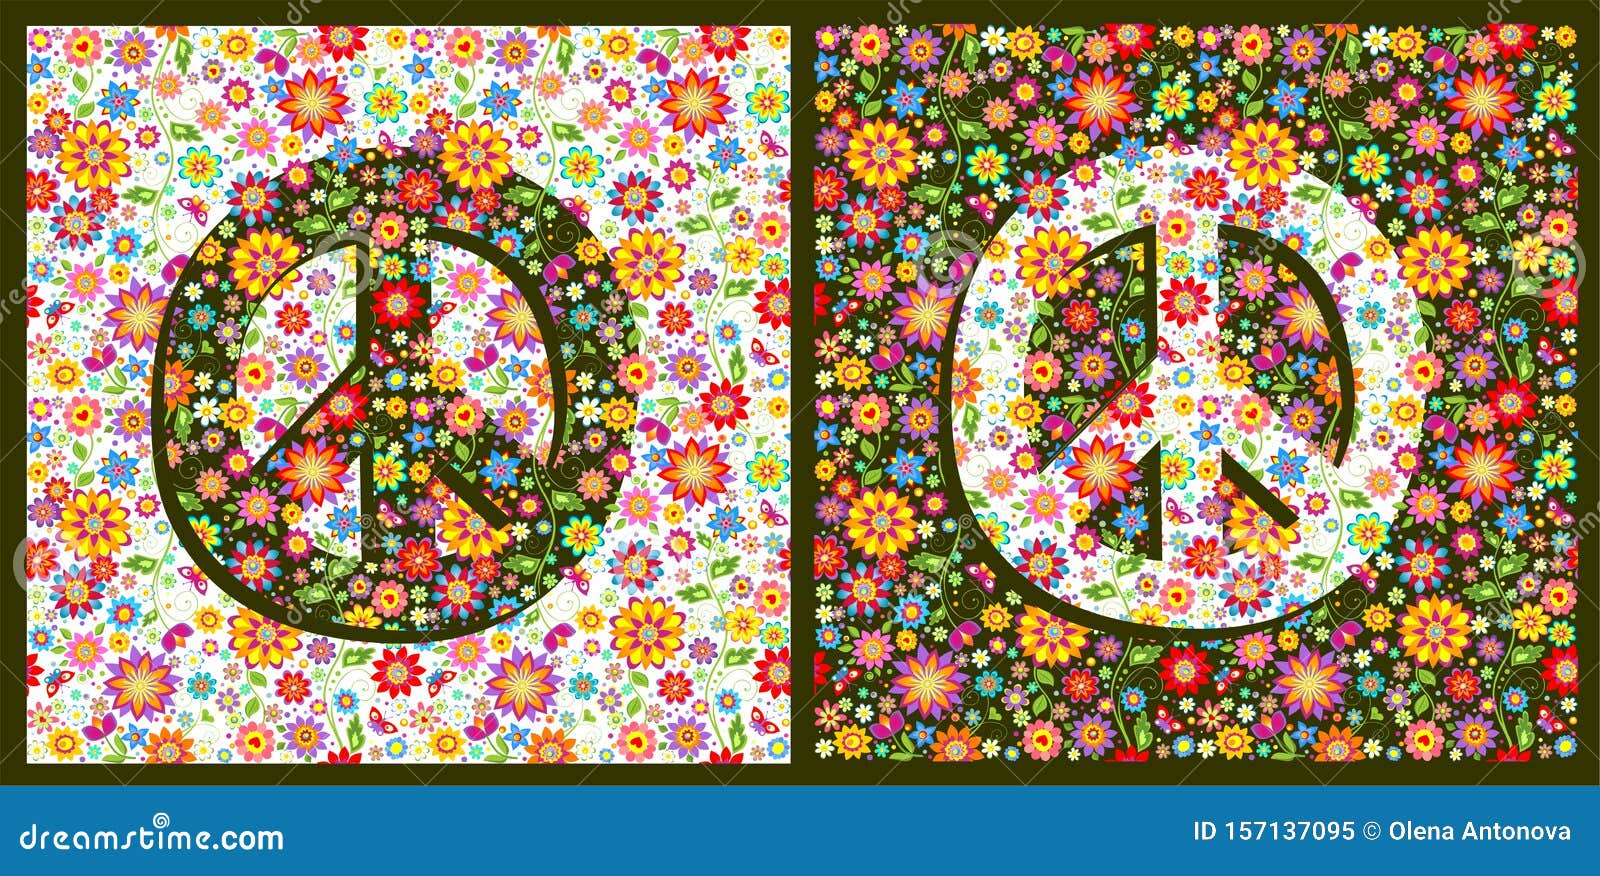 Flowers Hippie Colorful Fashion Wallpapers with Peace Symbol Variation  Stock Vector - Illustration of butterfly, floral: 157137095